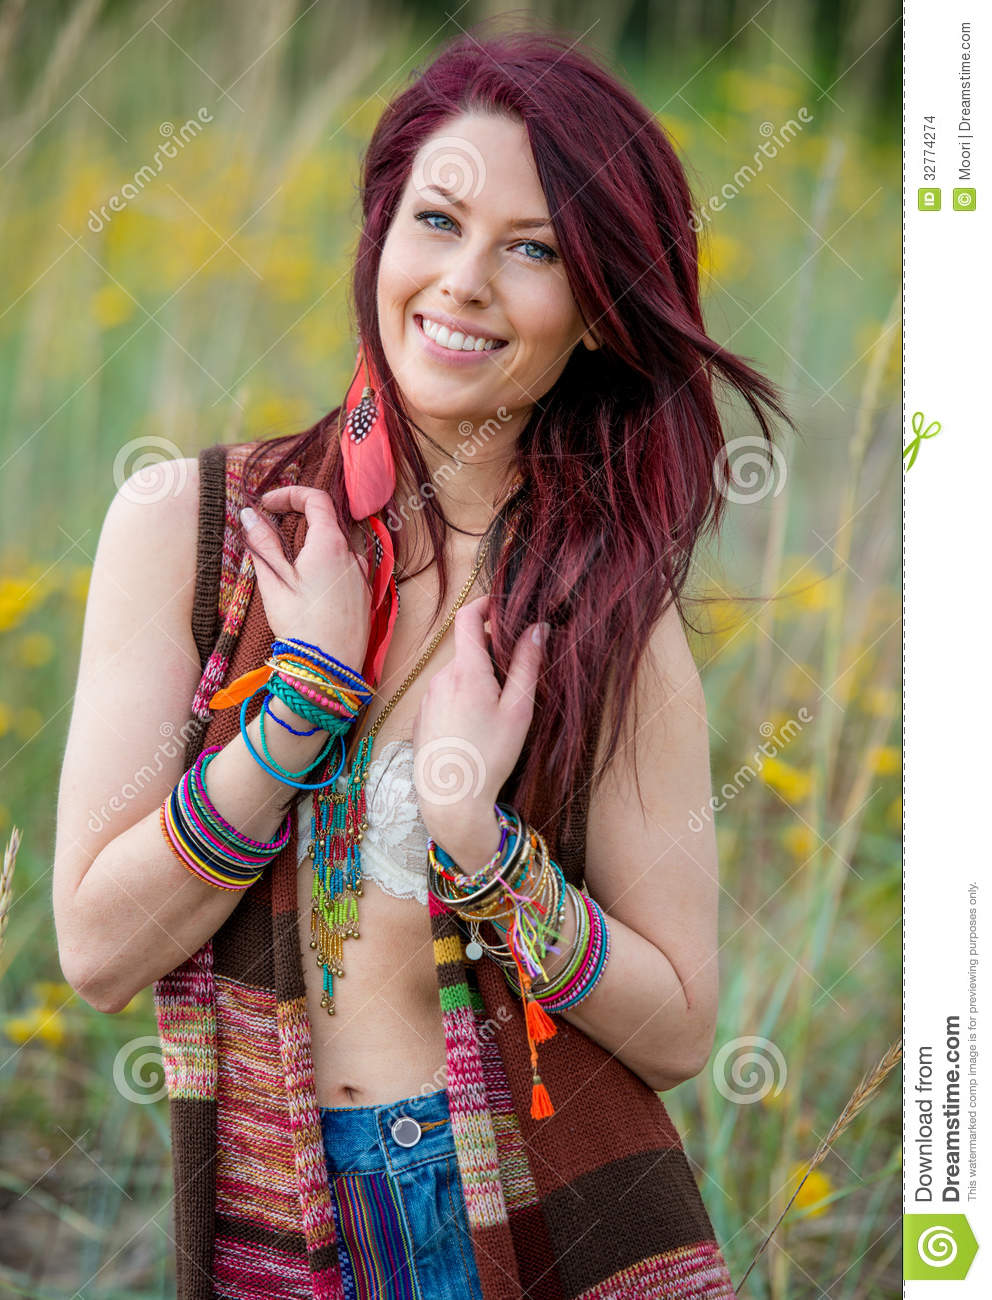 Stock Images  Young Hippie Girl In Boho Fashion  Image  32774274